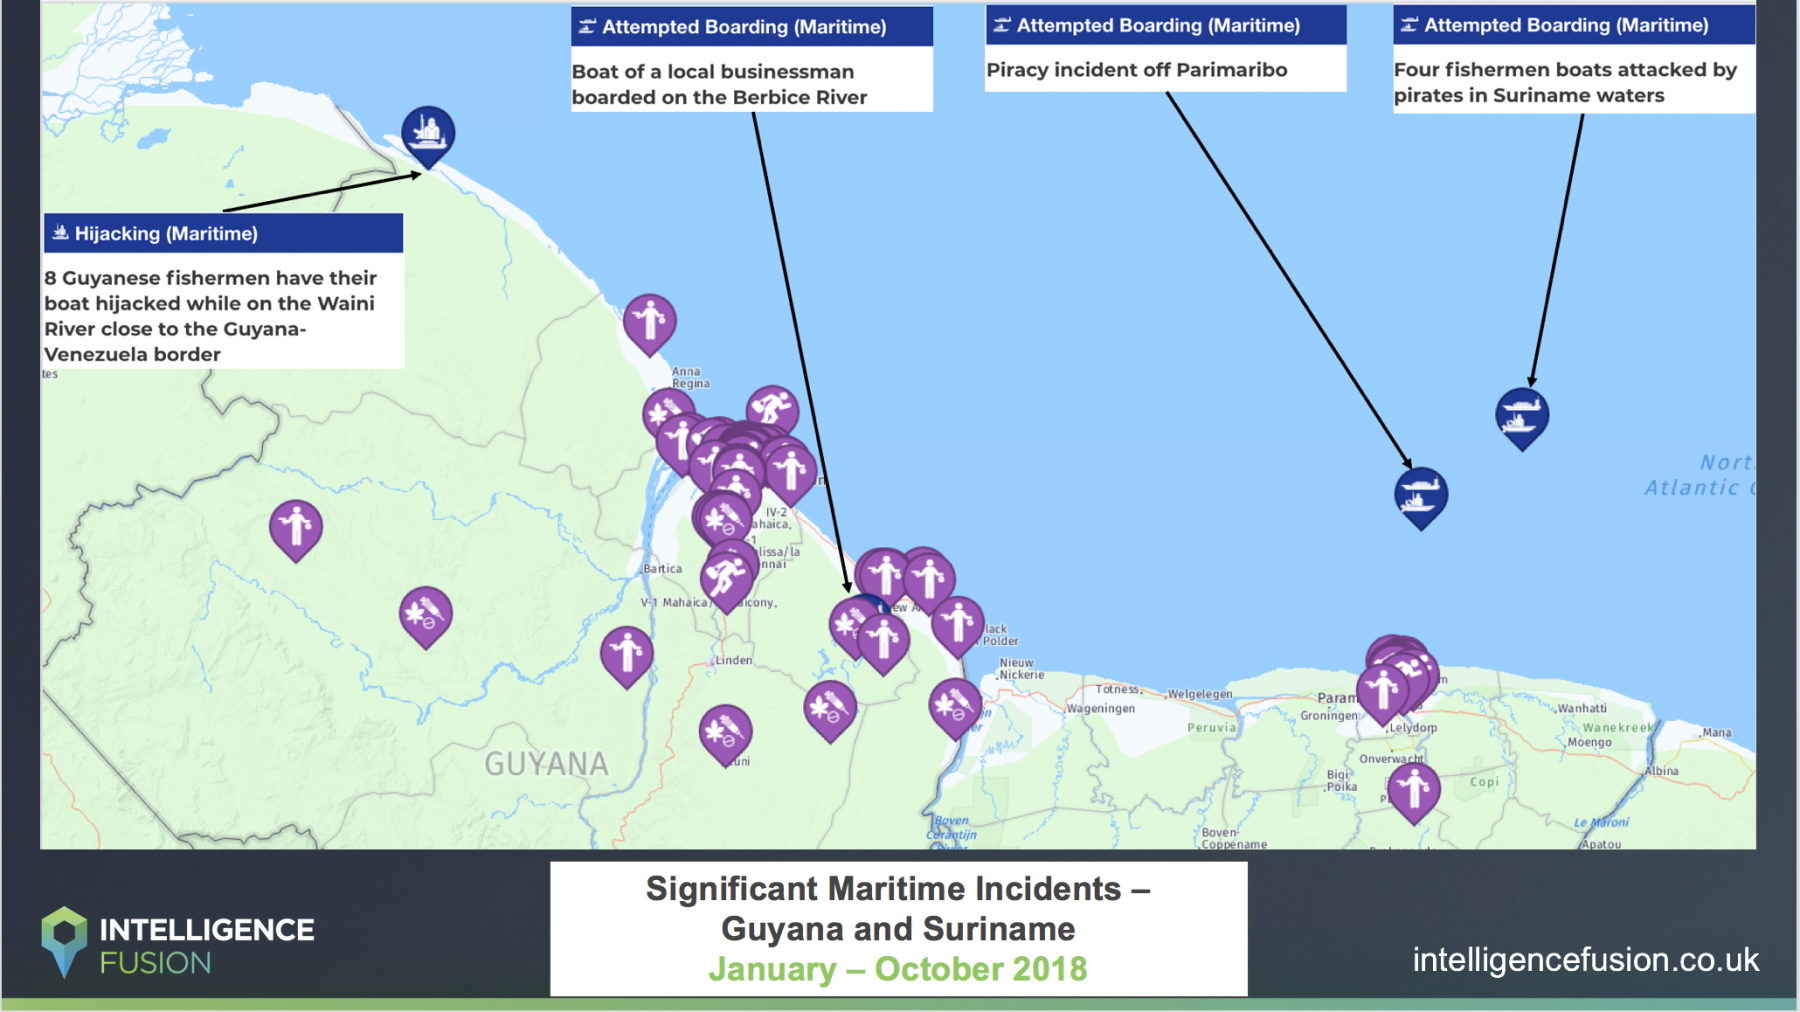 A map depicting the maritime related threats and cases of maritime criminality in Guyana and Suriname in 2018 so far